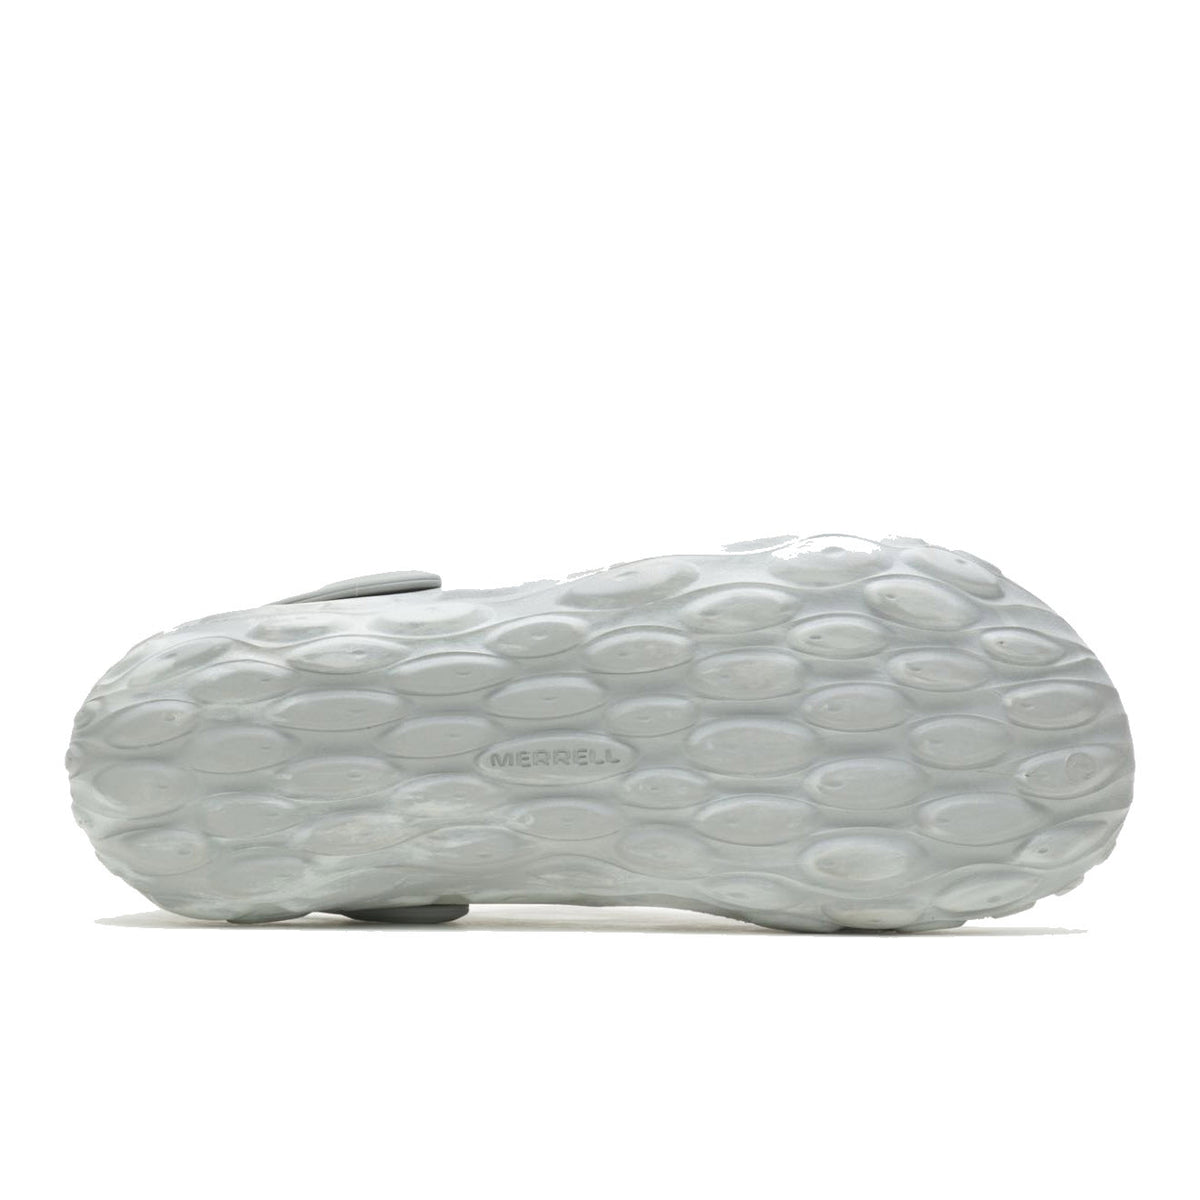 Side view of a gray Merrell HYRDRO MOC PALOMA sneaker with textured sole displayed against a white background.